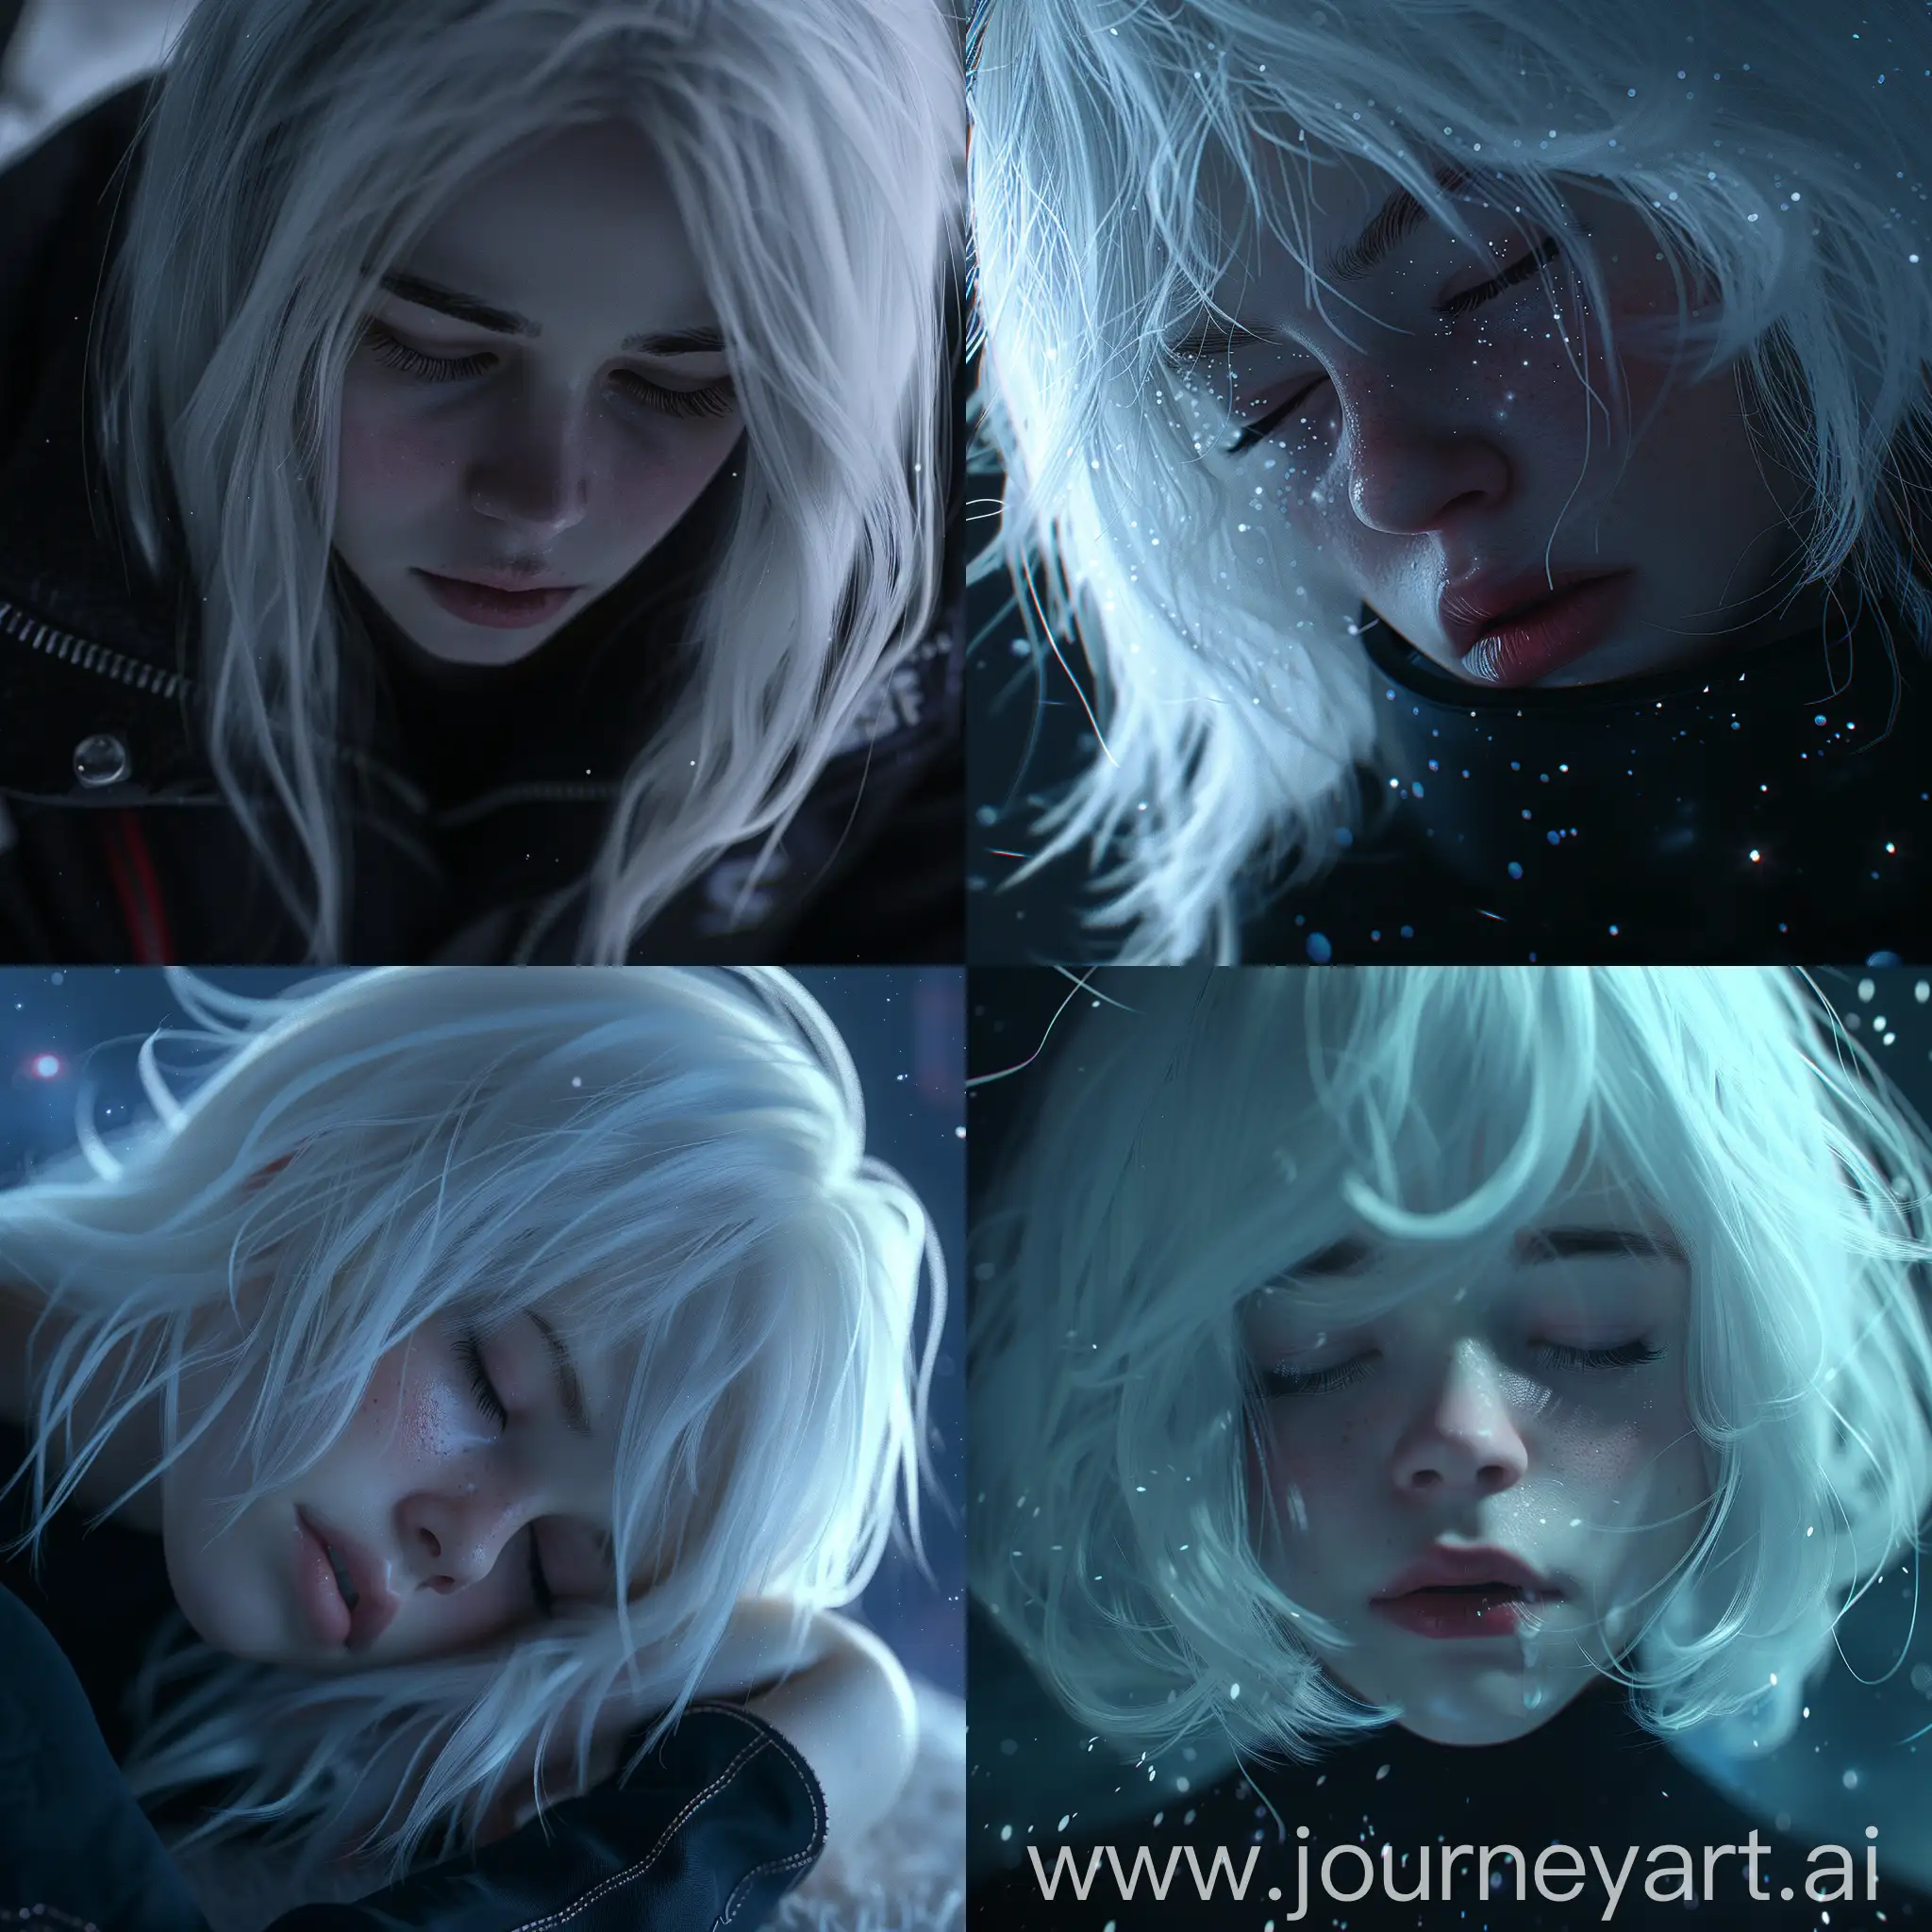 Lonely-Space-Journey-of-a-Realistic-Sad-Girl-with-White-Hair-Ultra-Quality-8K-Image